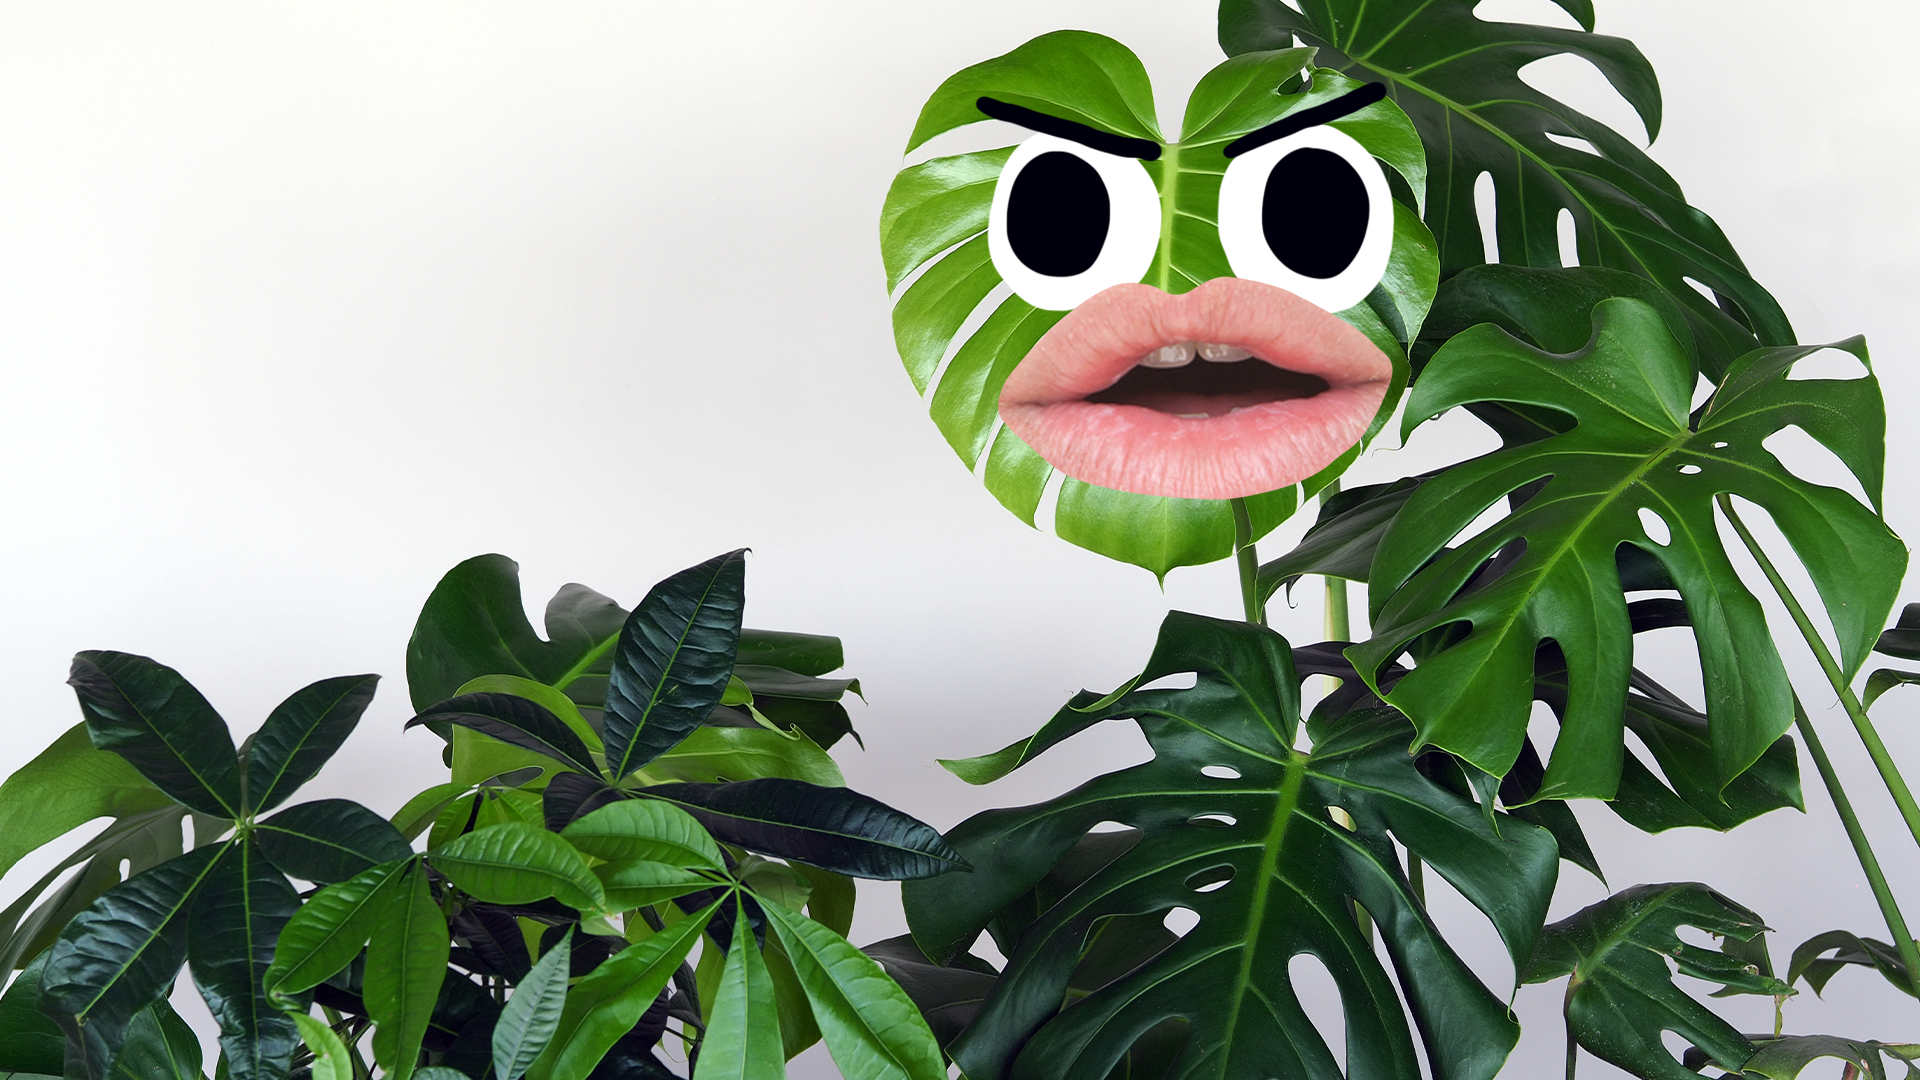 House plant with face